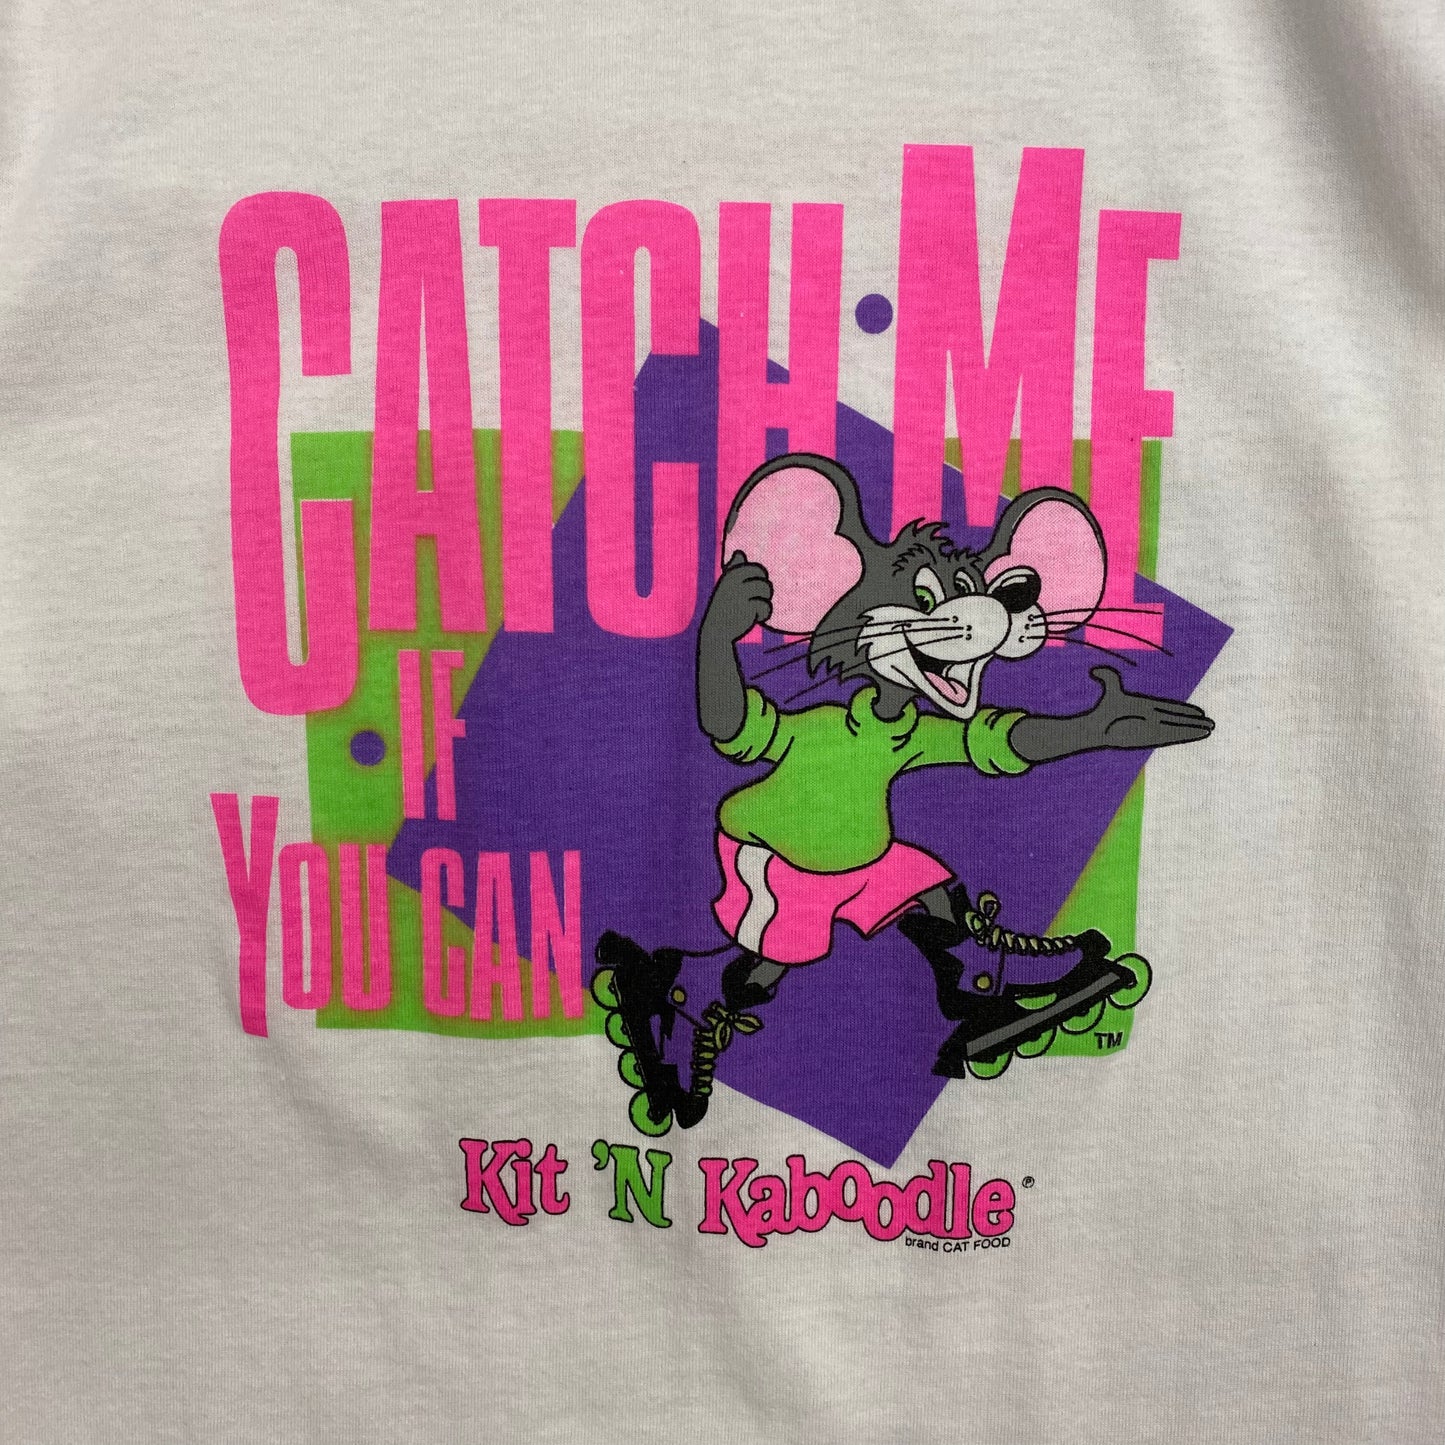 Vintage 1990s "Catch Me If You Can" Kit 'N Kaboodle Cat Food Tee - Size Medium